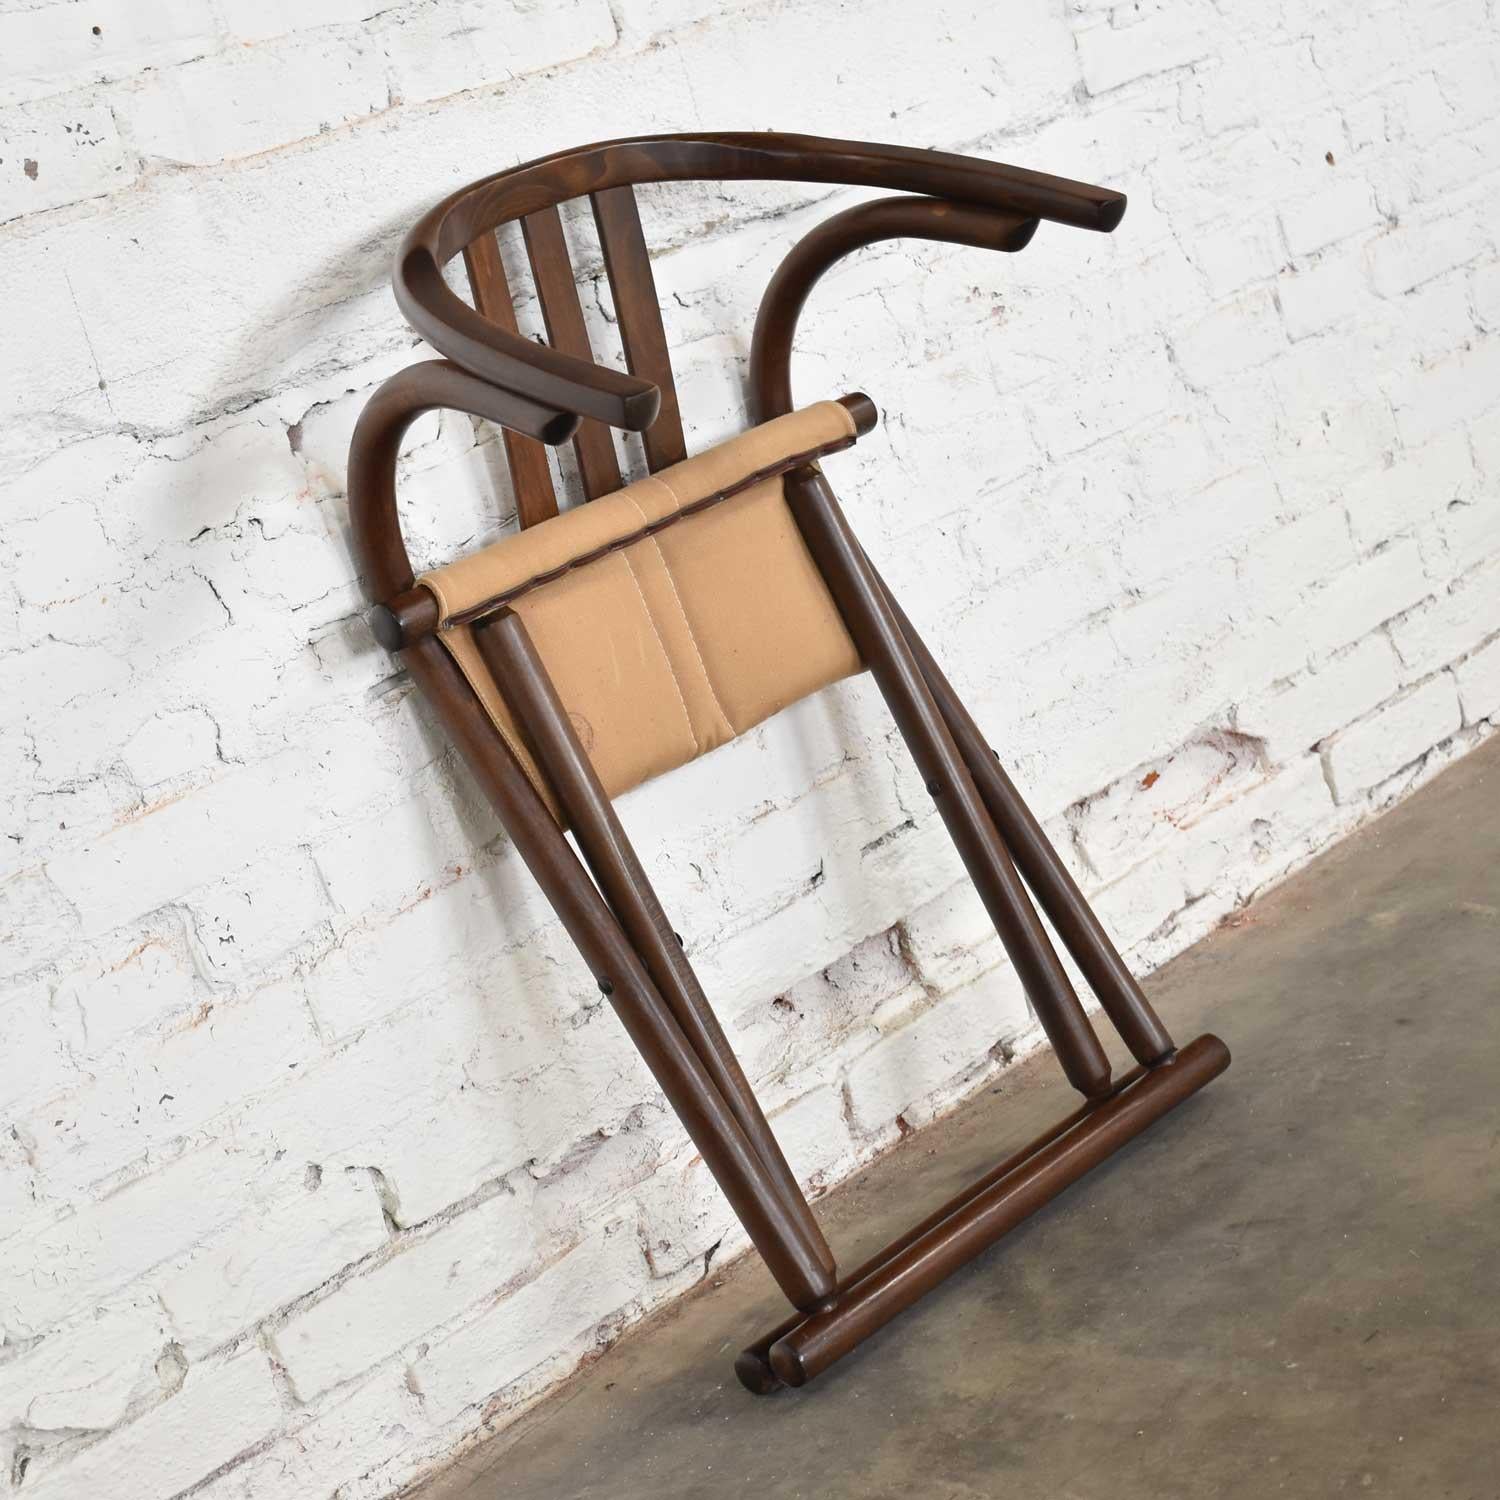 20th Century Thonet Style Bentwood Walnut Tone Folding Chair with Canvas Sling Seat, Romania